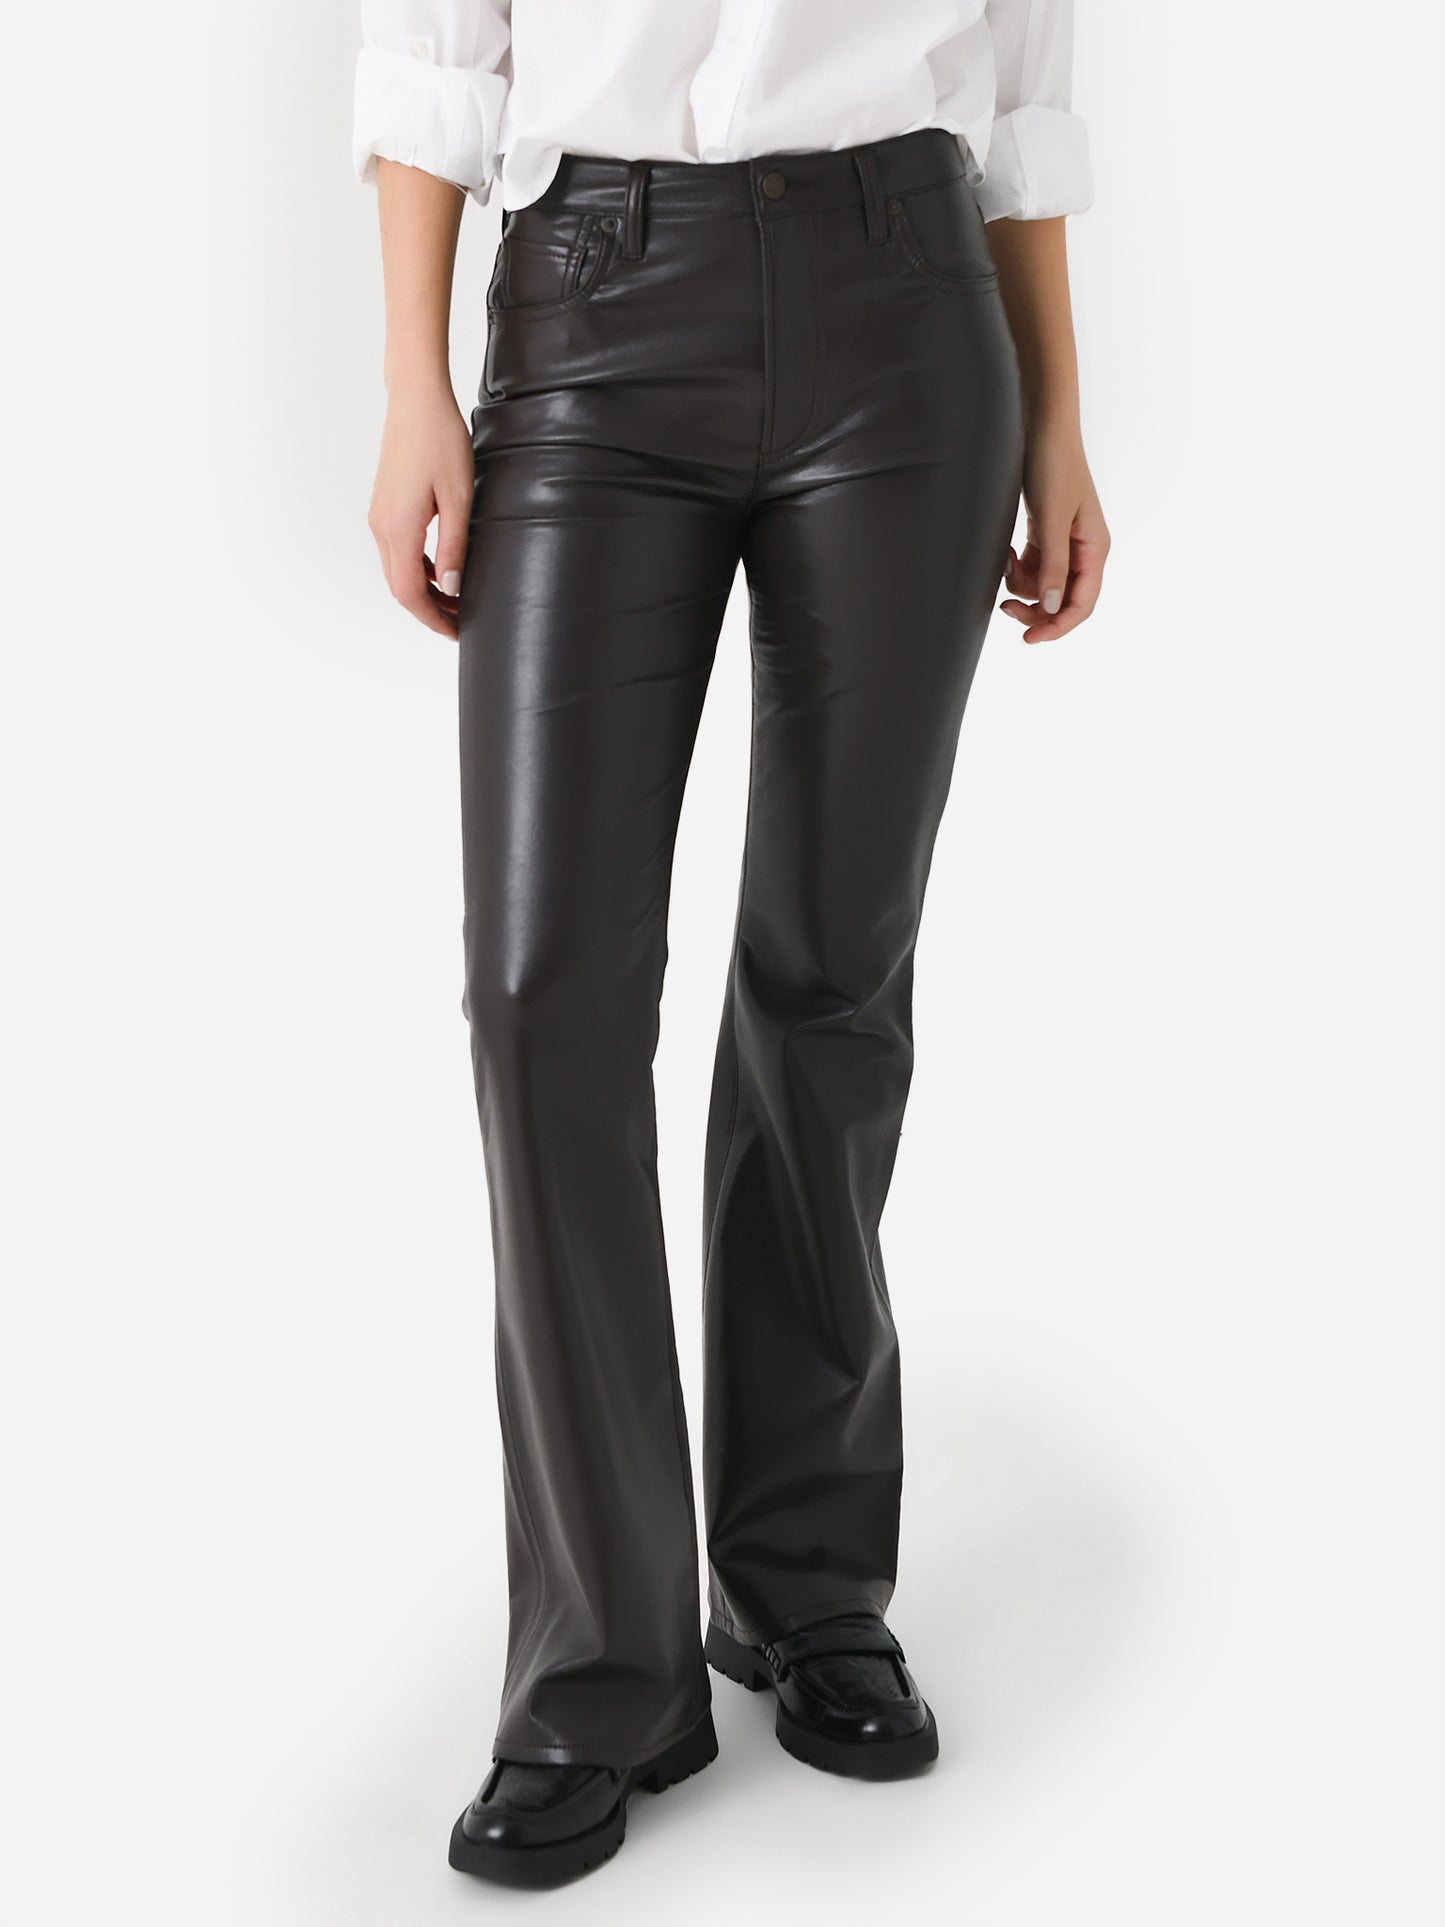 Citizens Of Humanity Women's Lilah High Rise Recycled Leather Bootcut Pant